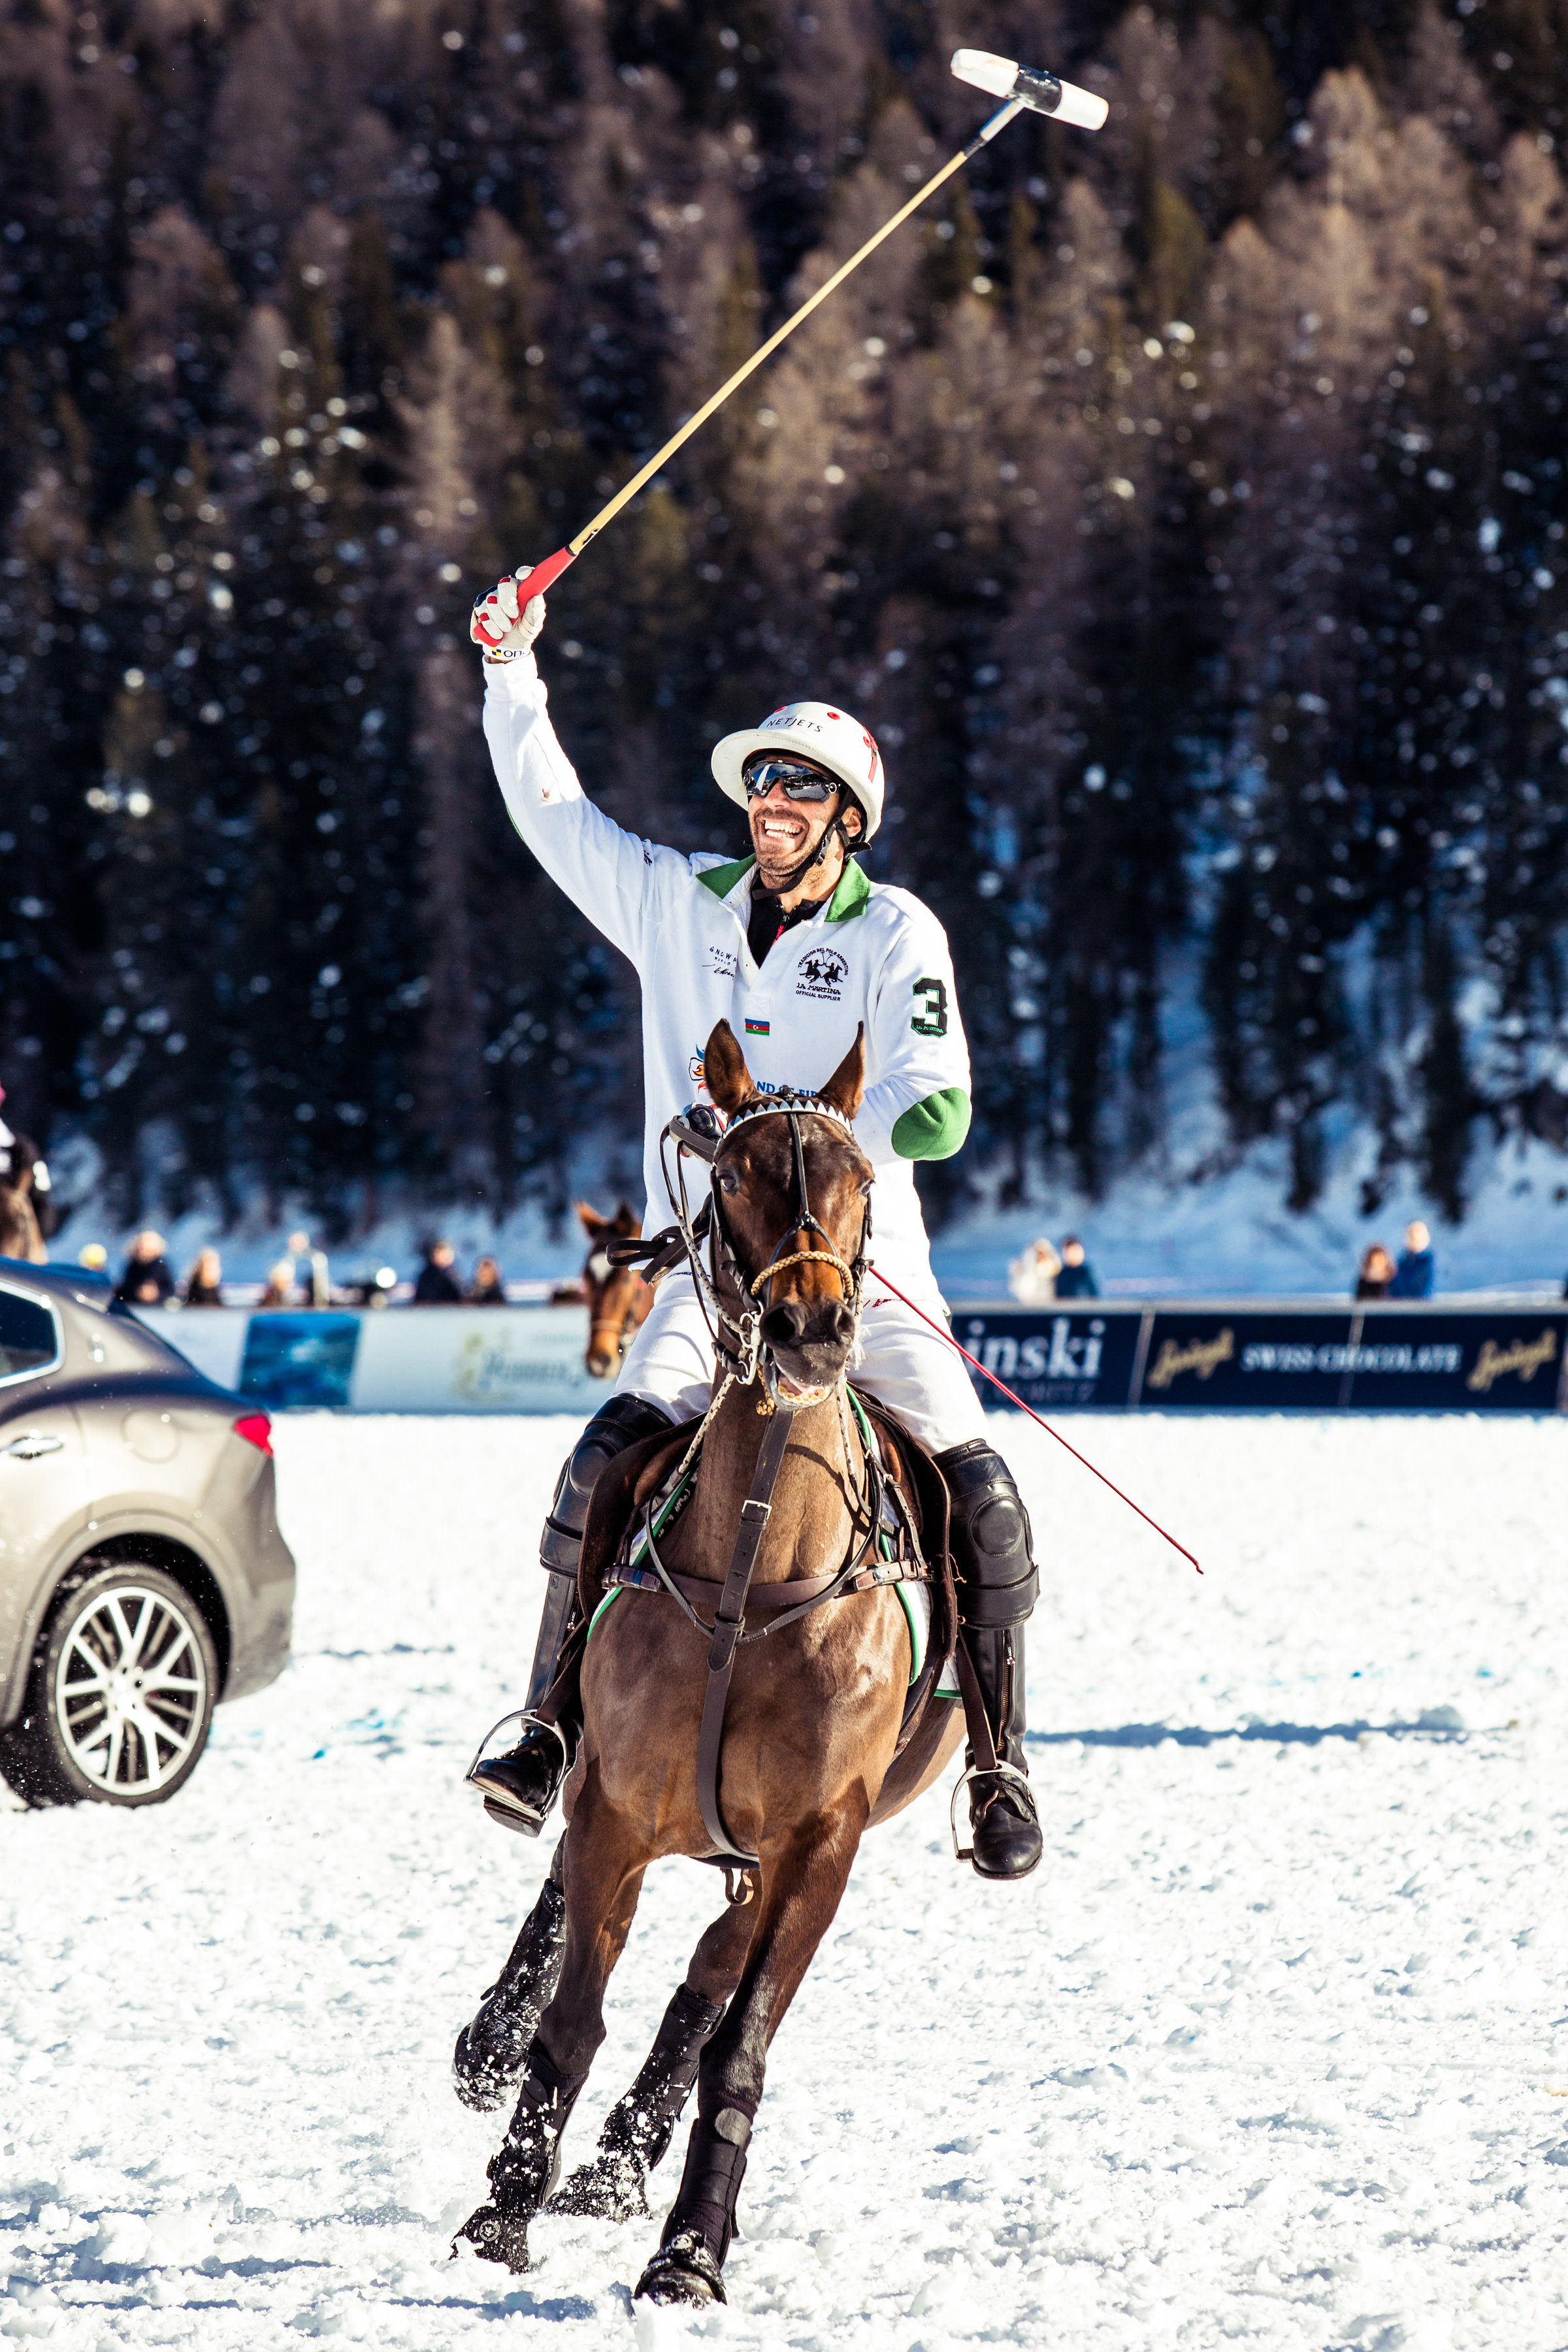 A victory lap by the Azerbaijan Land of Fire Snow Polo team 2018